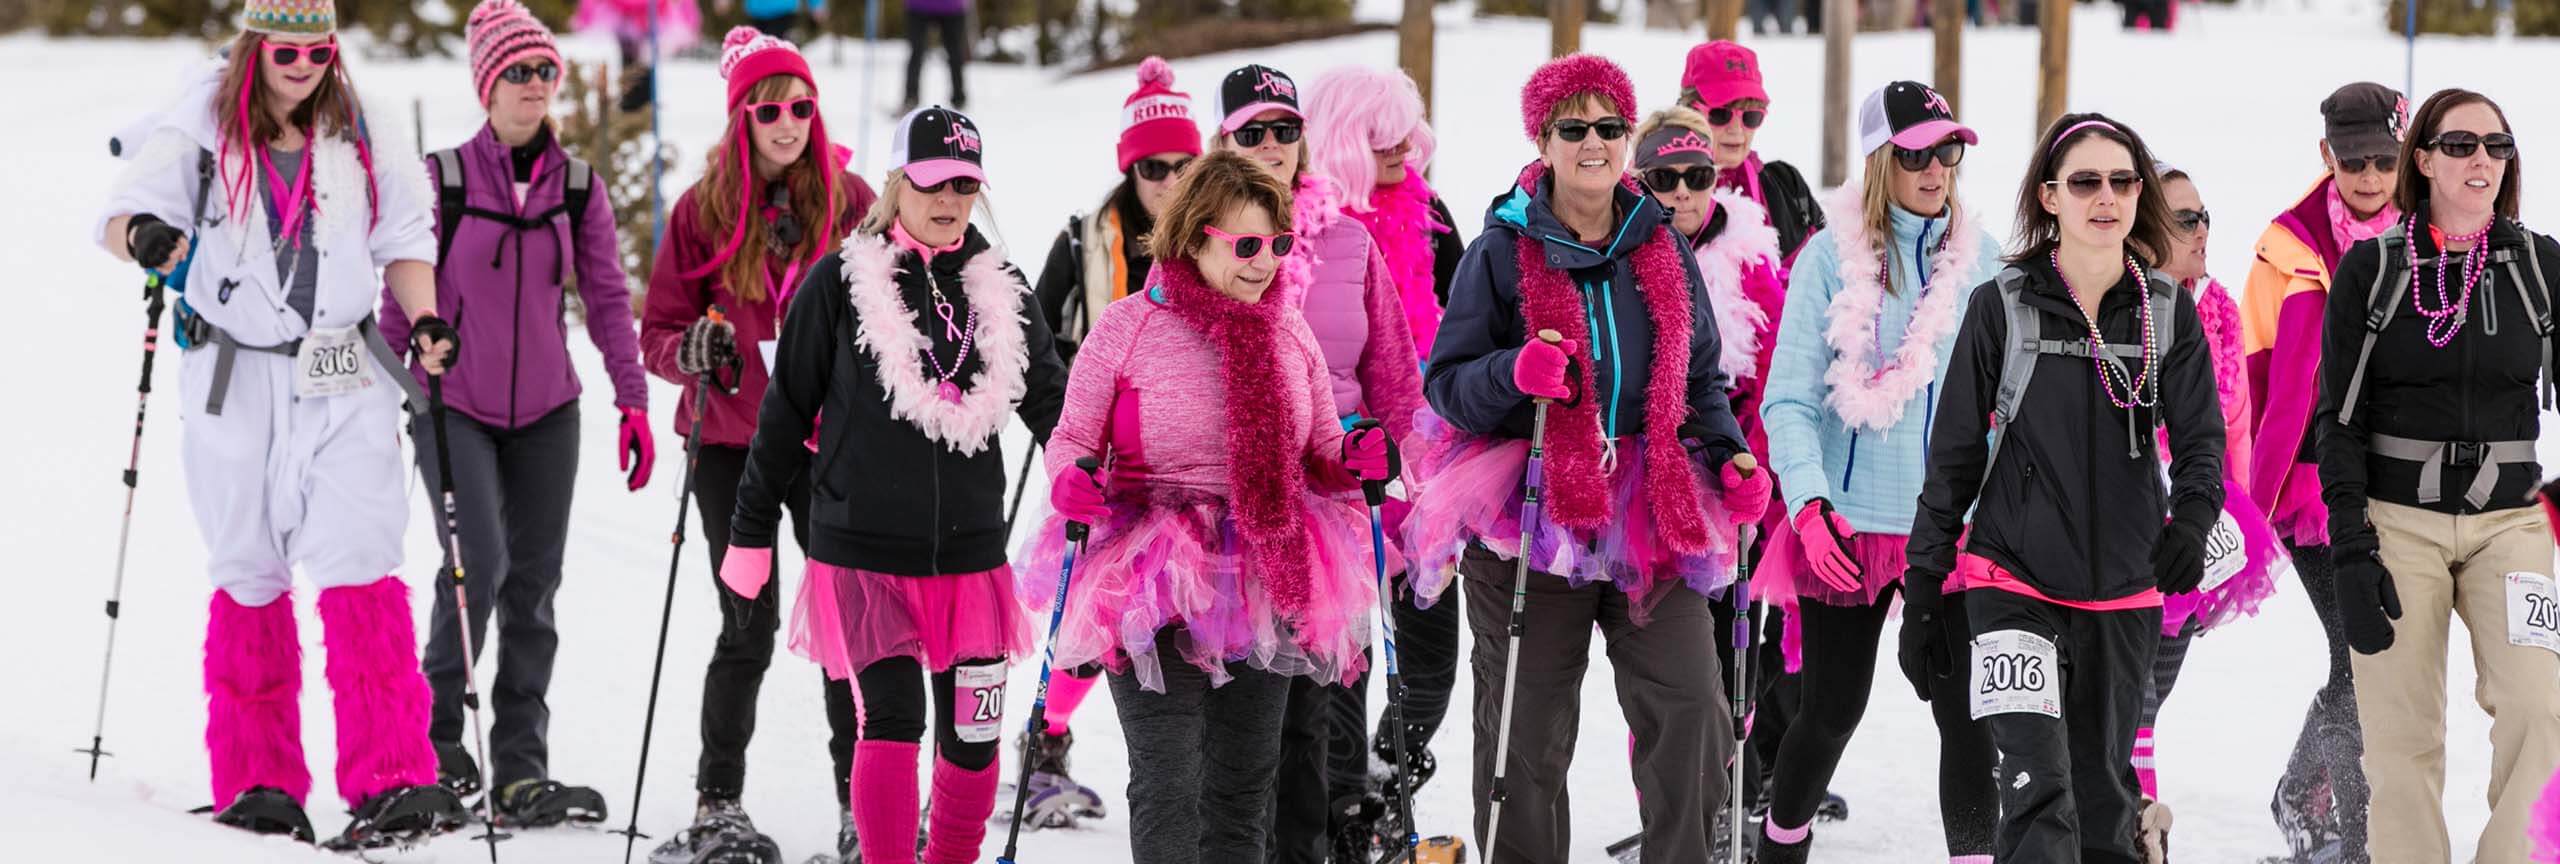 Group of women dressed in pink snowshoeing at Snowshoe for the Cure event